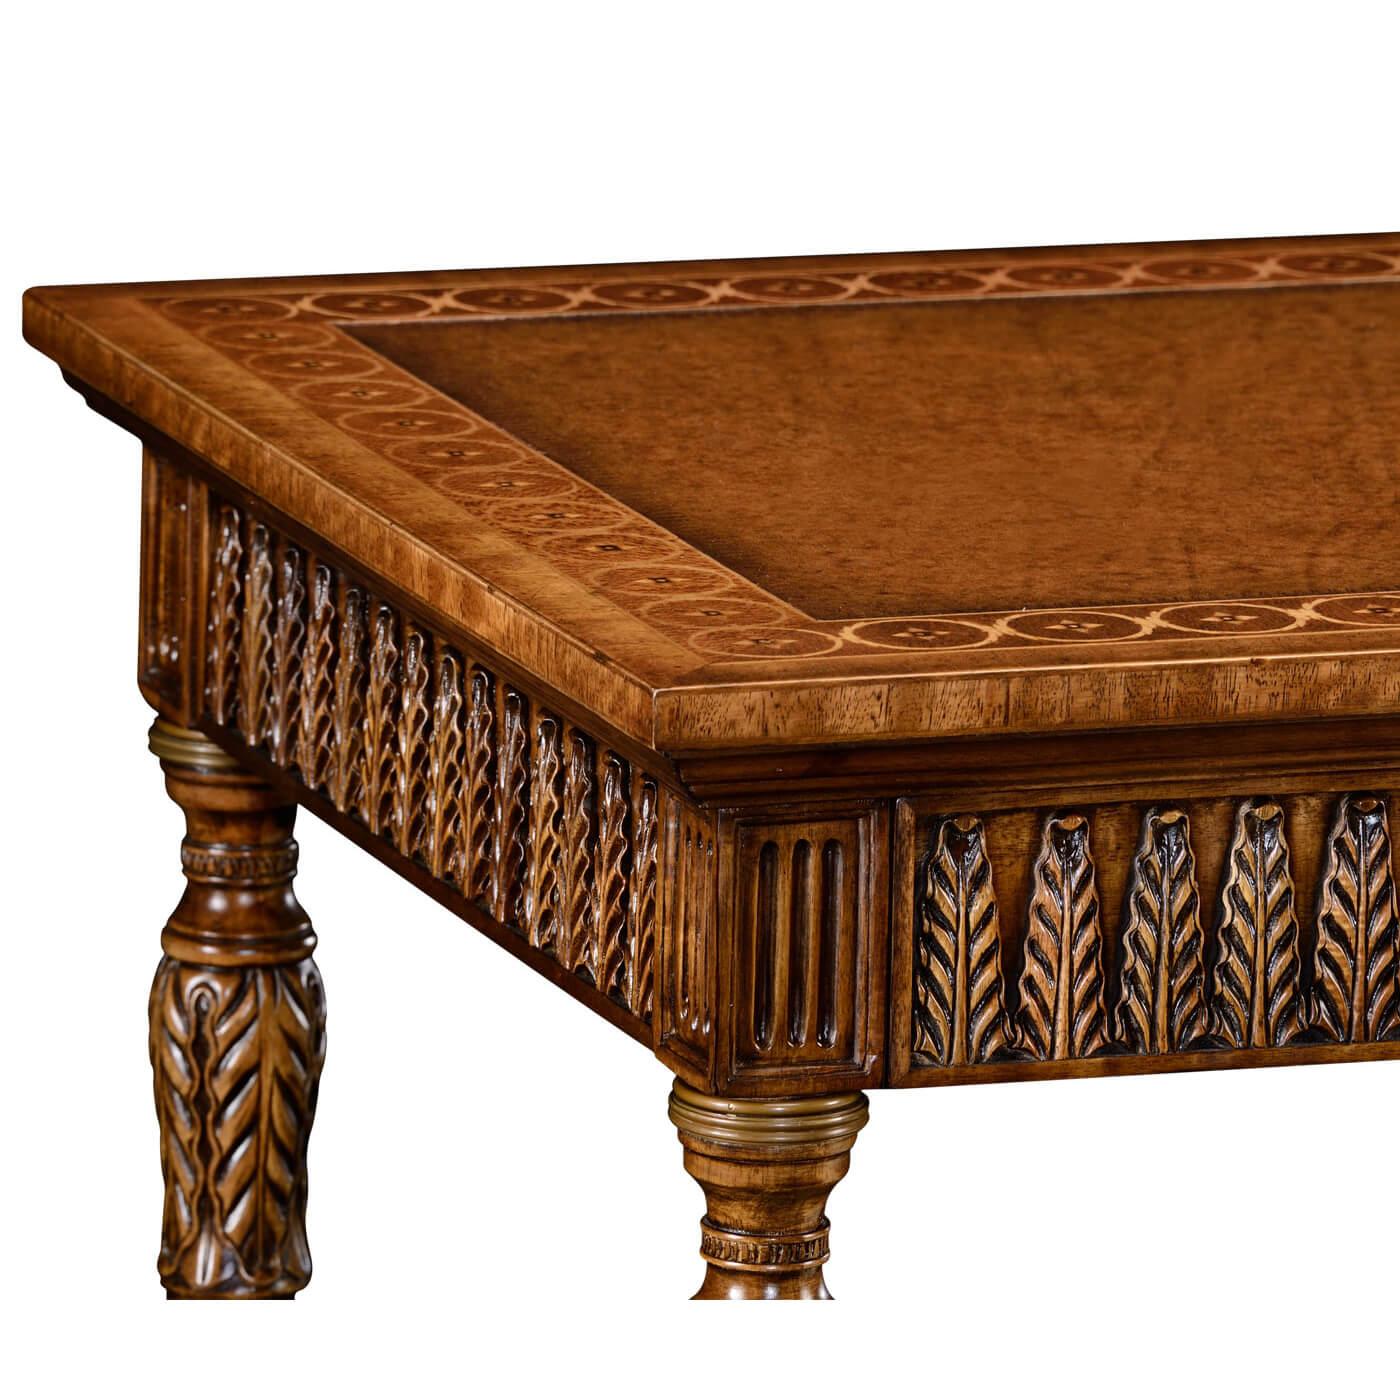 Contemporary French Neoclassic Writing Table